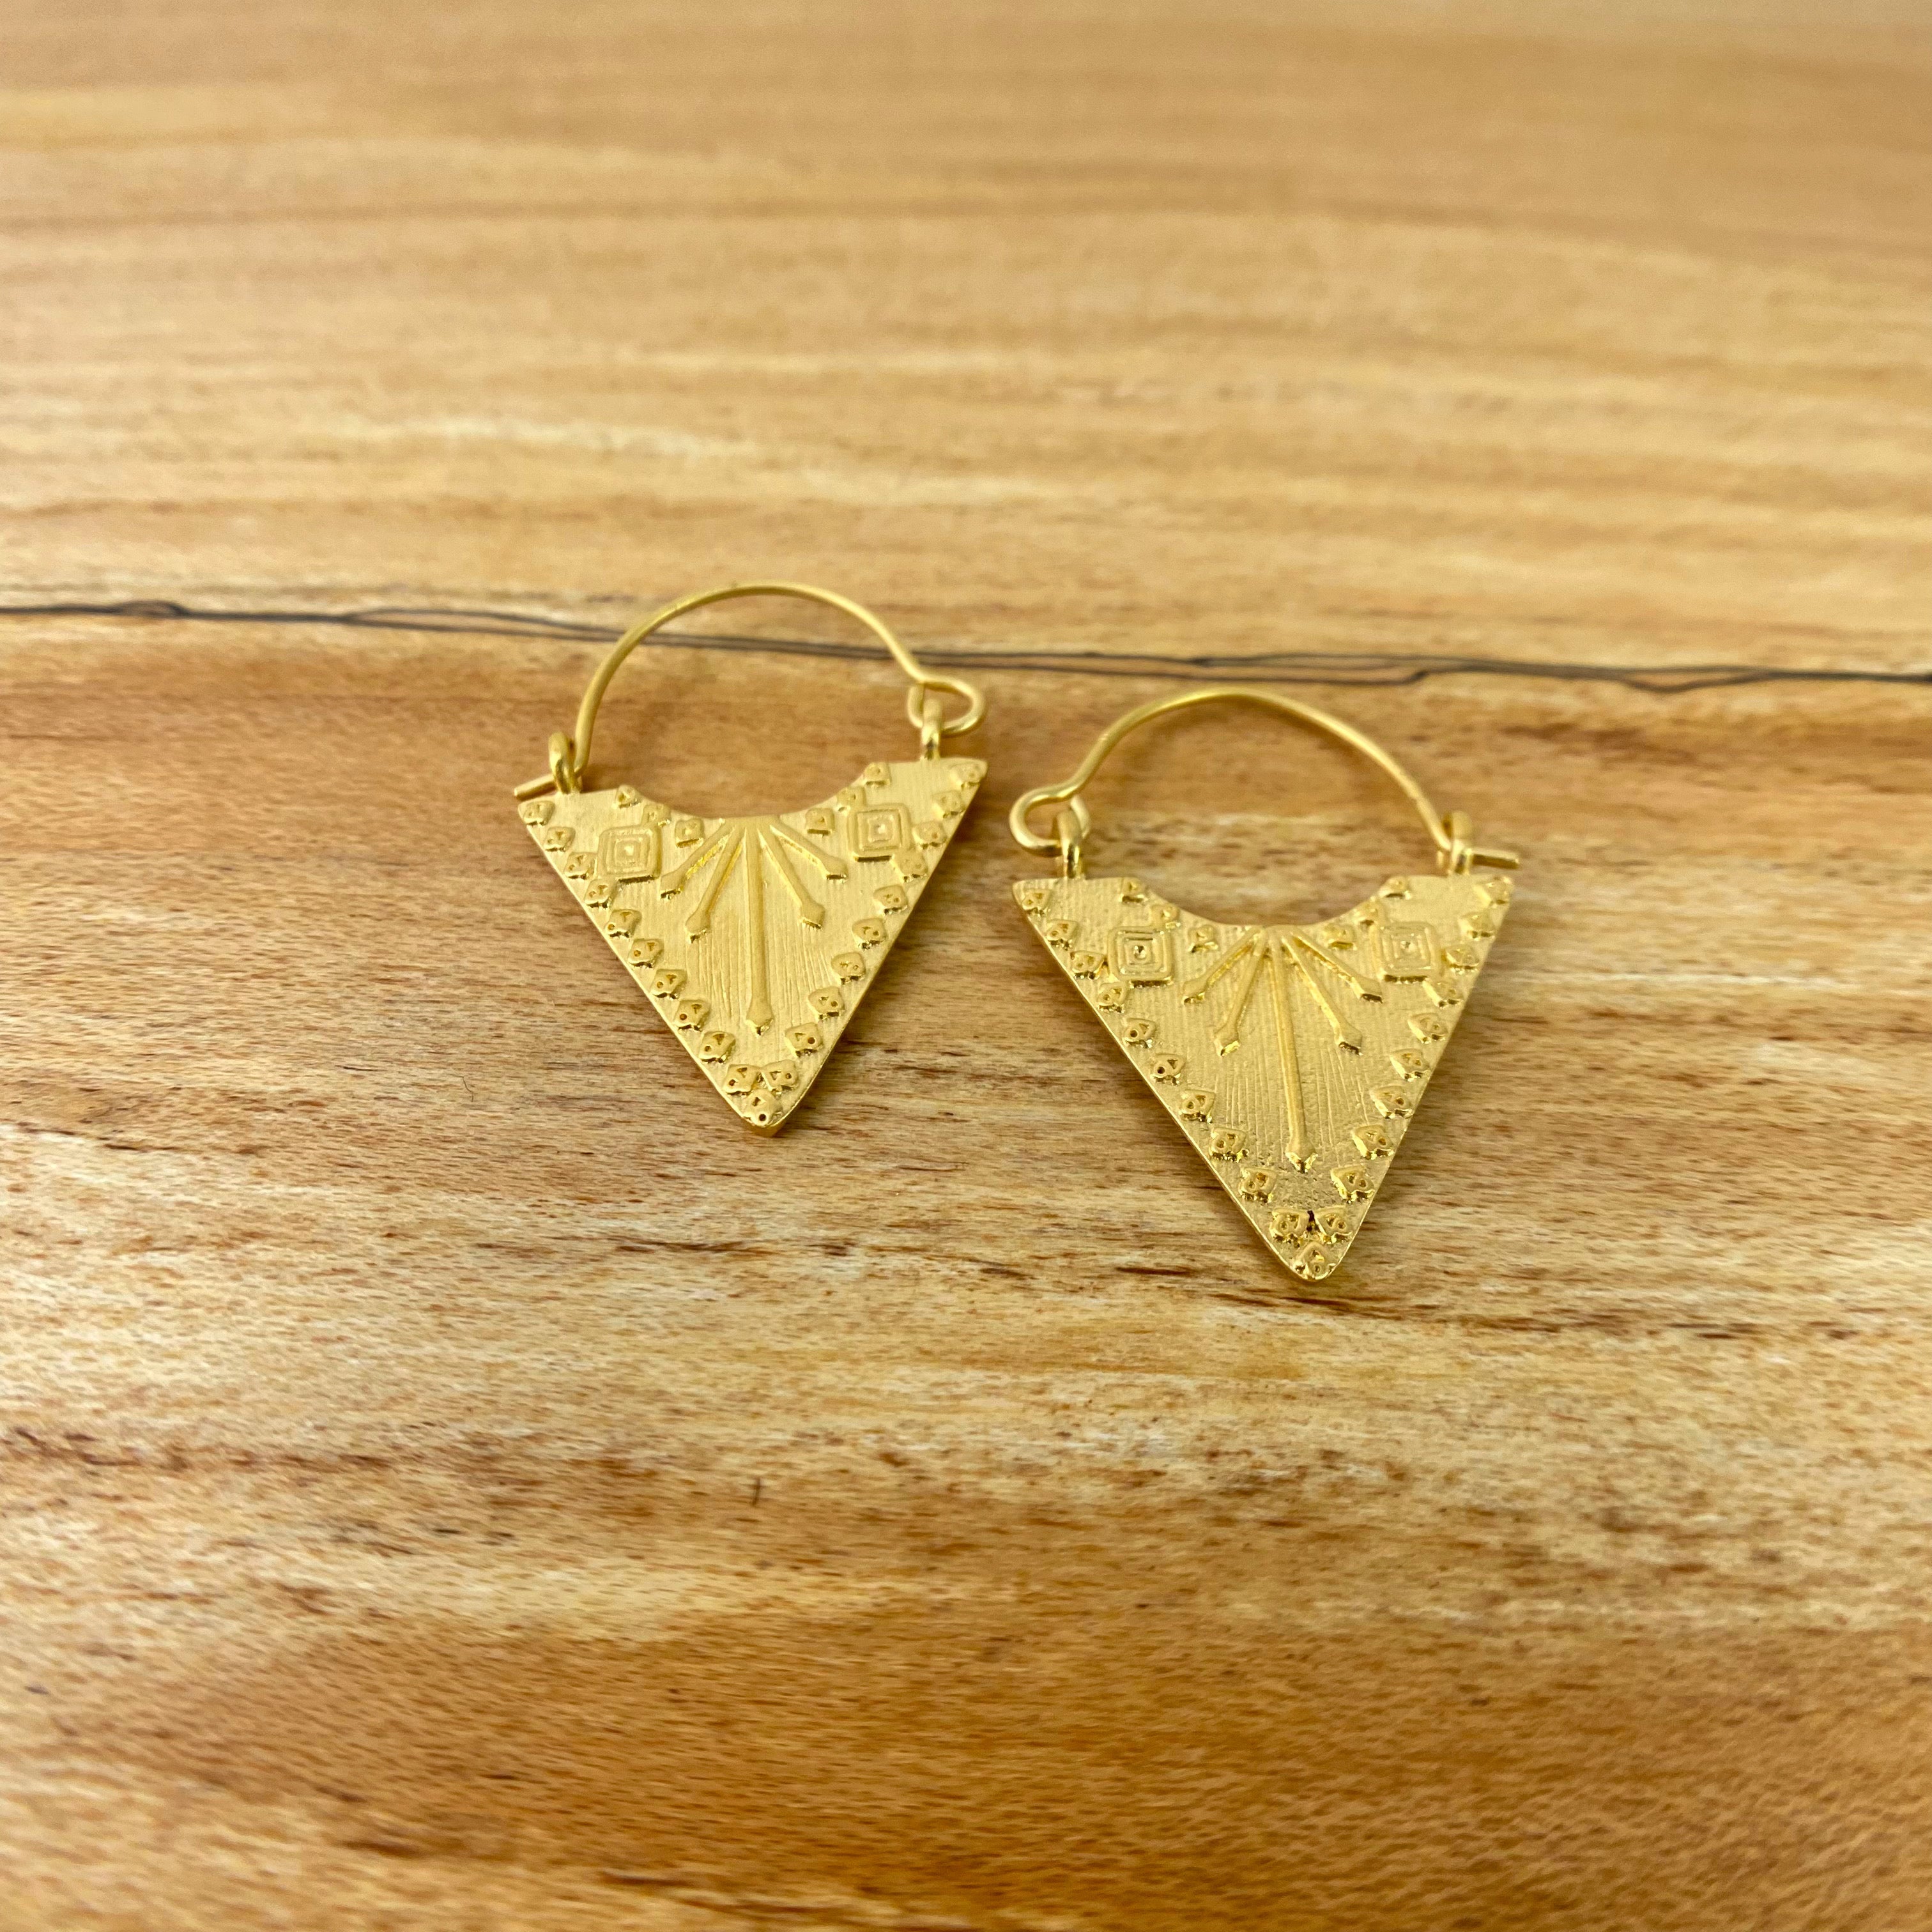 "Graceful Strength" Engraved Triangle Earrings by Satya Jewelry